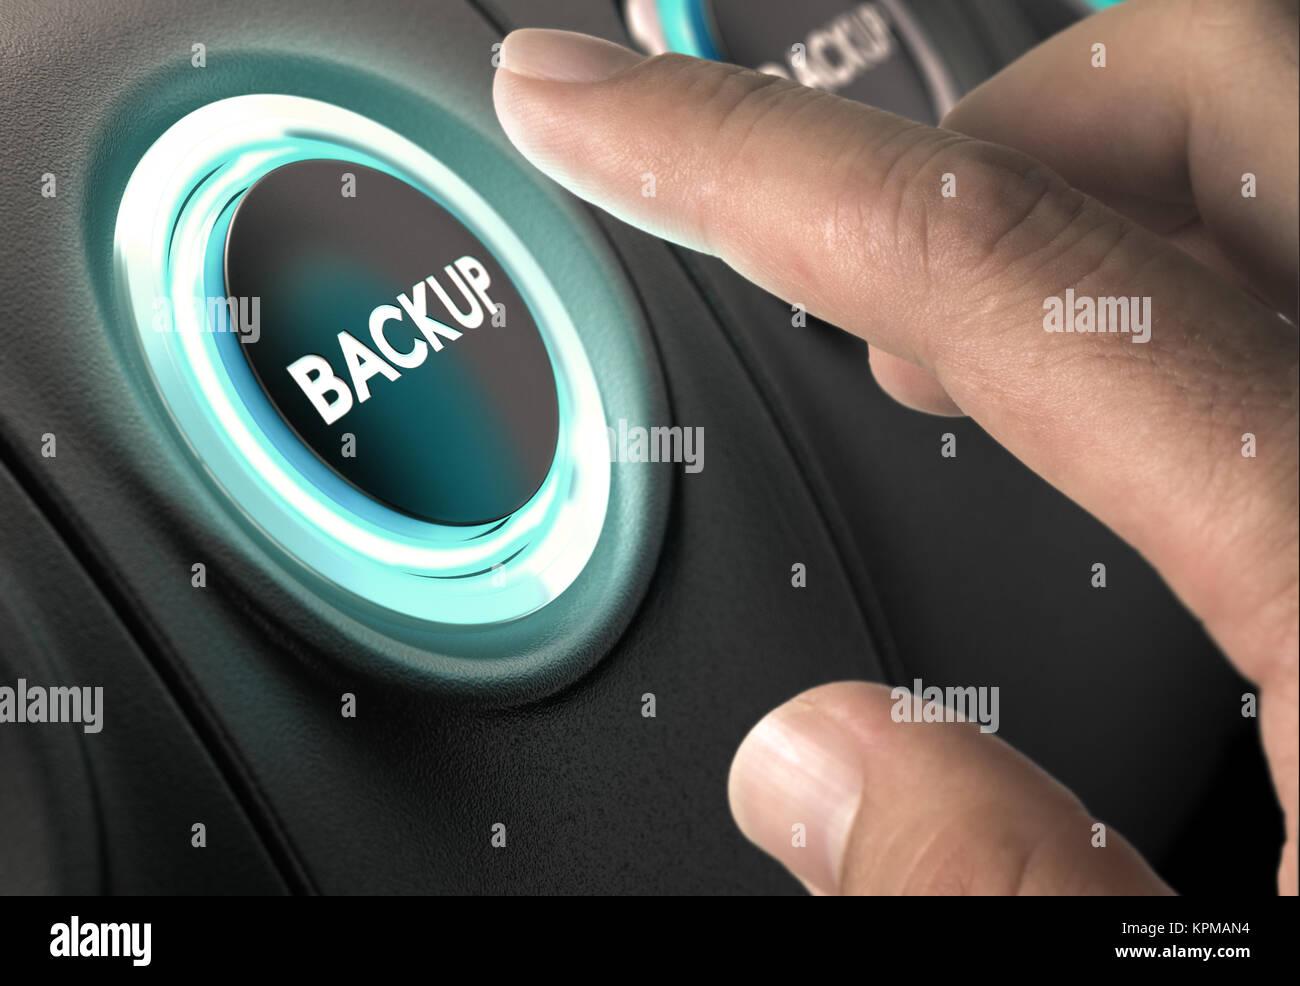 Data Backup, Security Concept Stock Photo